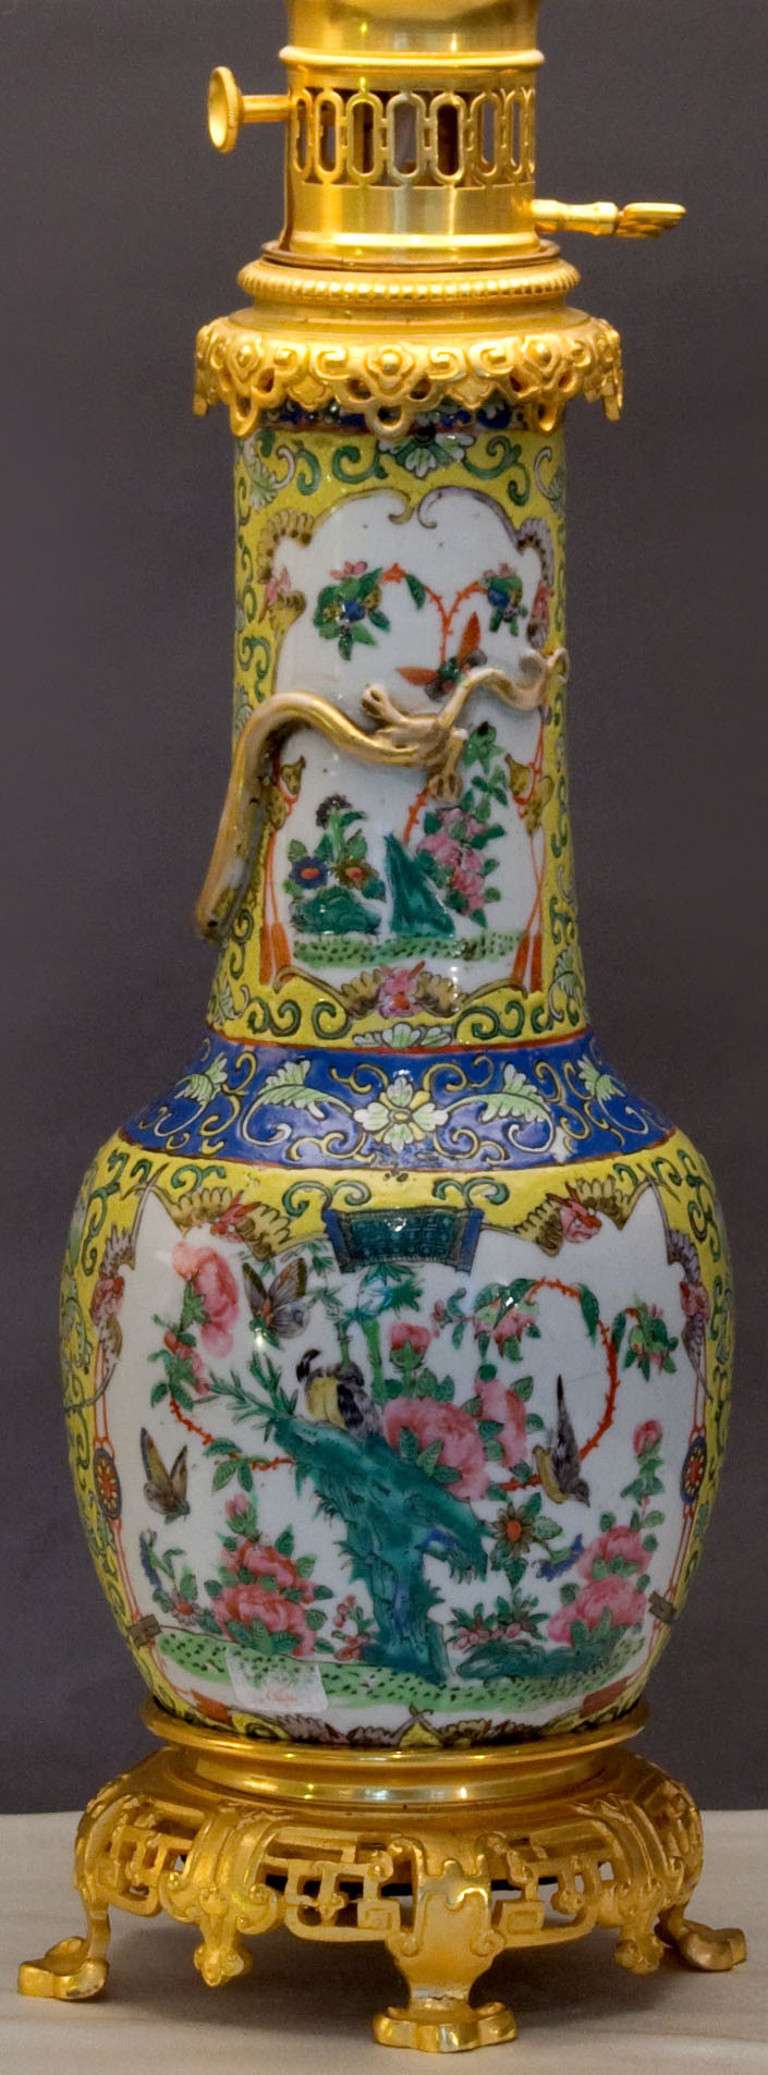 A very fine pair of baluster form lamps in the Famille Jaune palette hand decorated with foliates, butterflies and birds, in polychromes, fitted with gilt bronze mounts. 

Lamps have a white background with yellow, green, blue and red flowers,